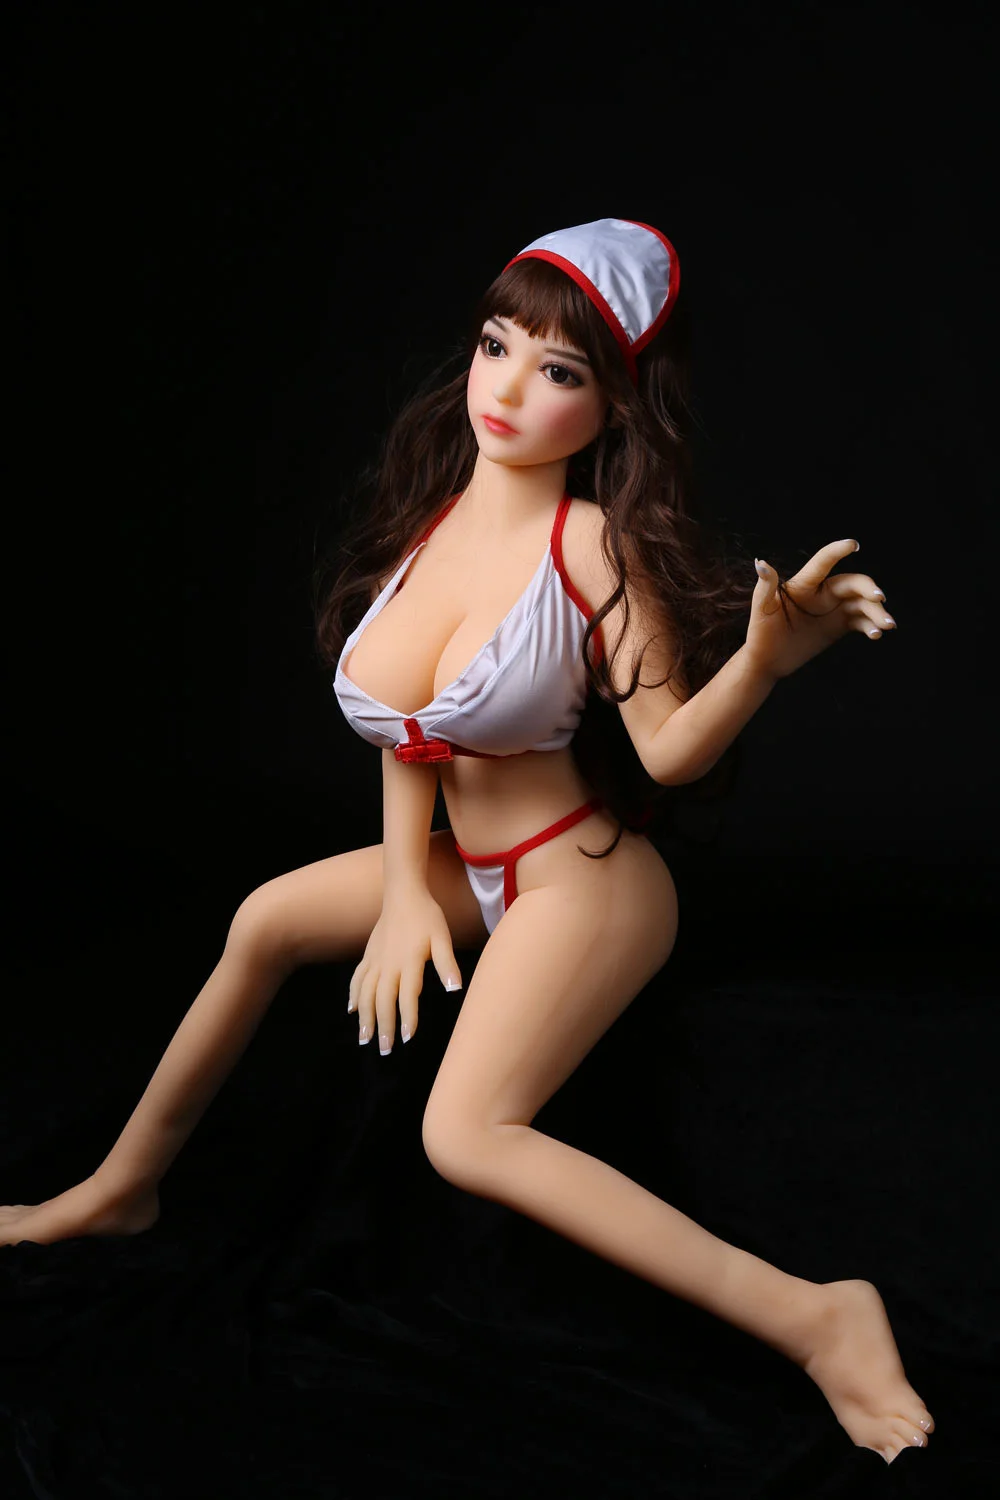 Mini sex doll with one hand raised